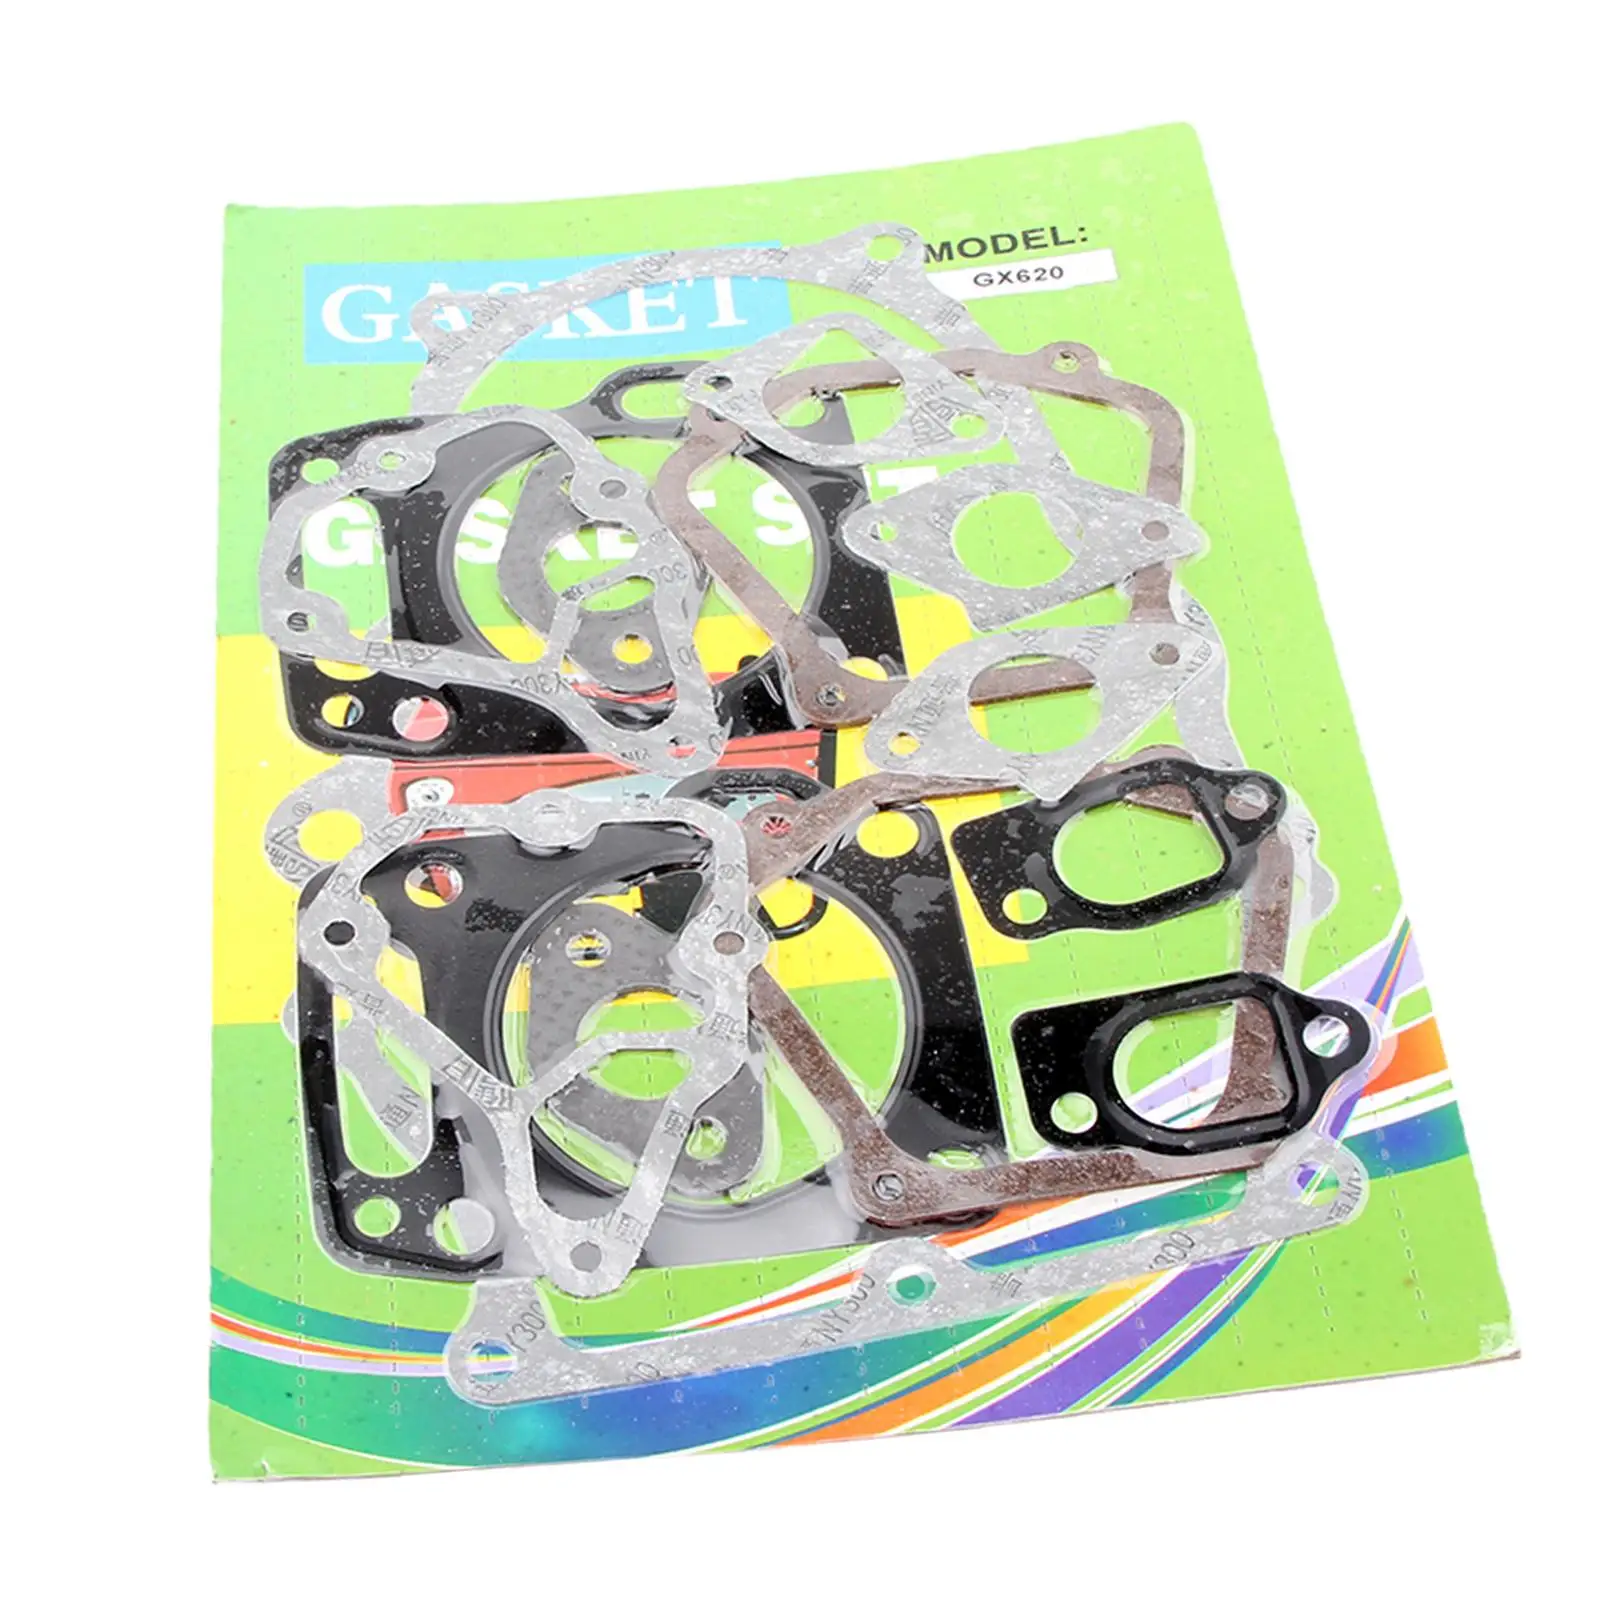 Gx620 Gaskets Set Fits  Gx620 Replaces Full Set of Gaskets Head Gasket